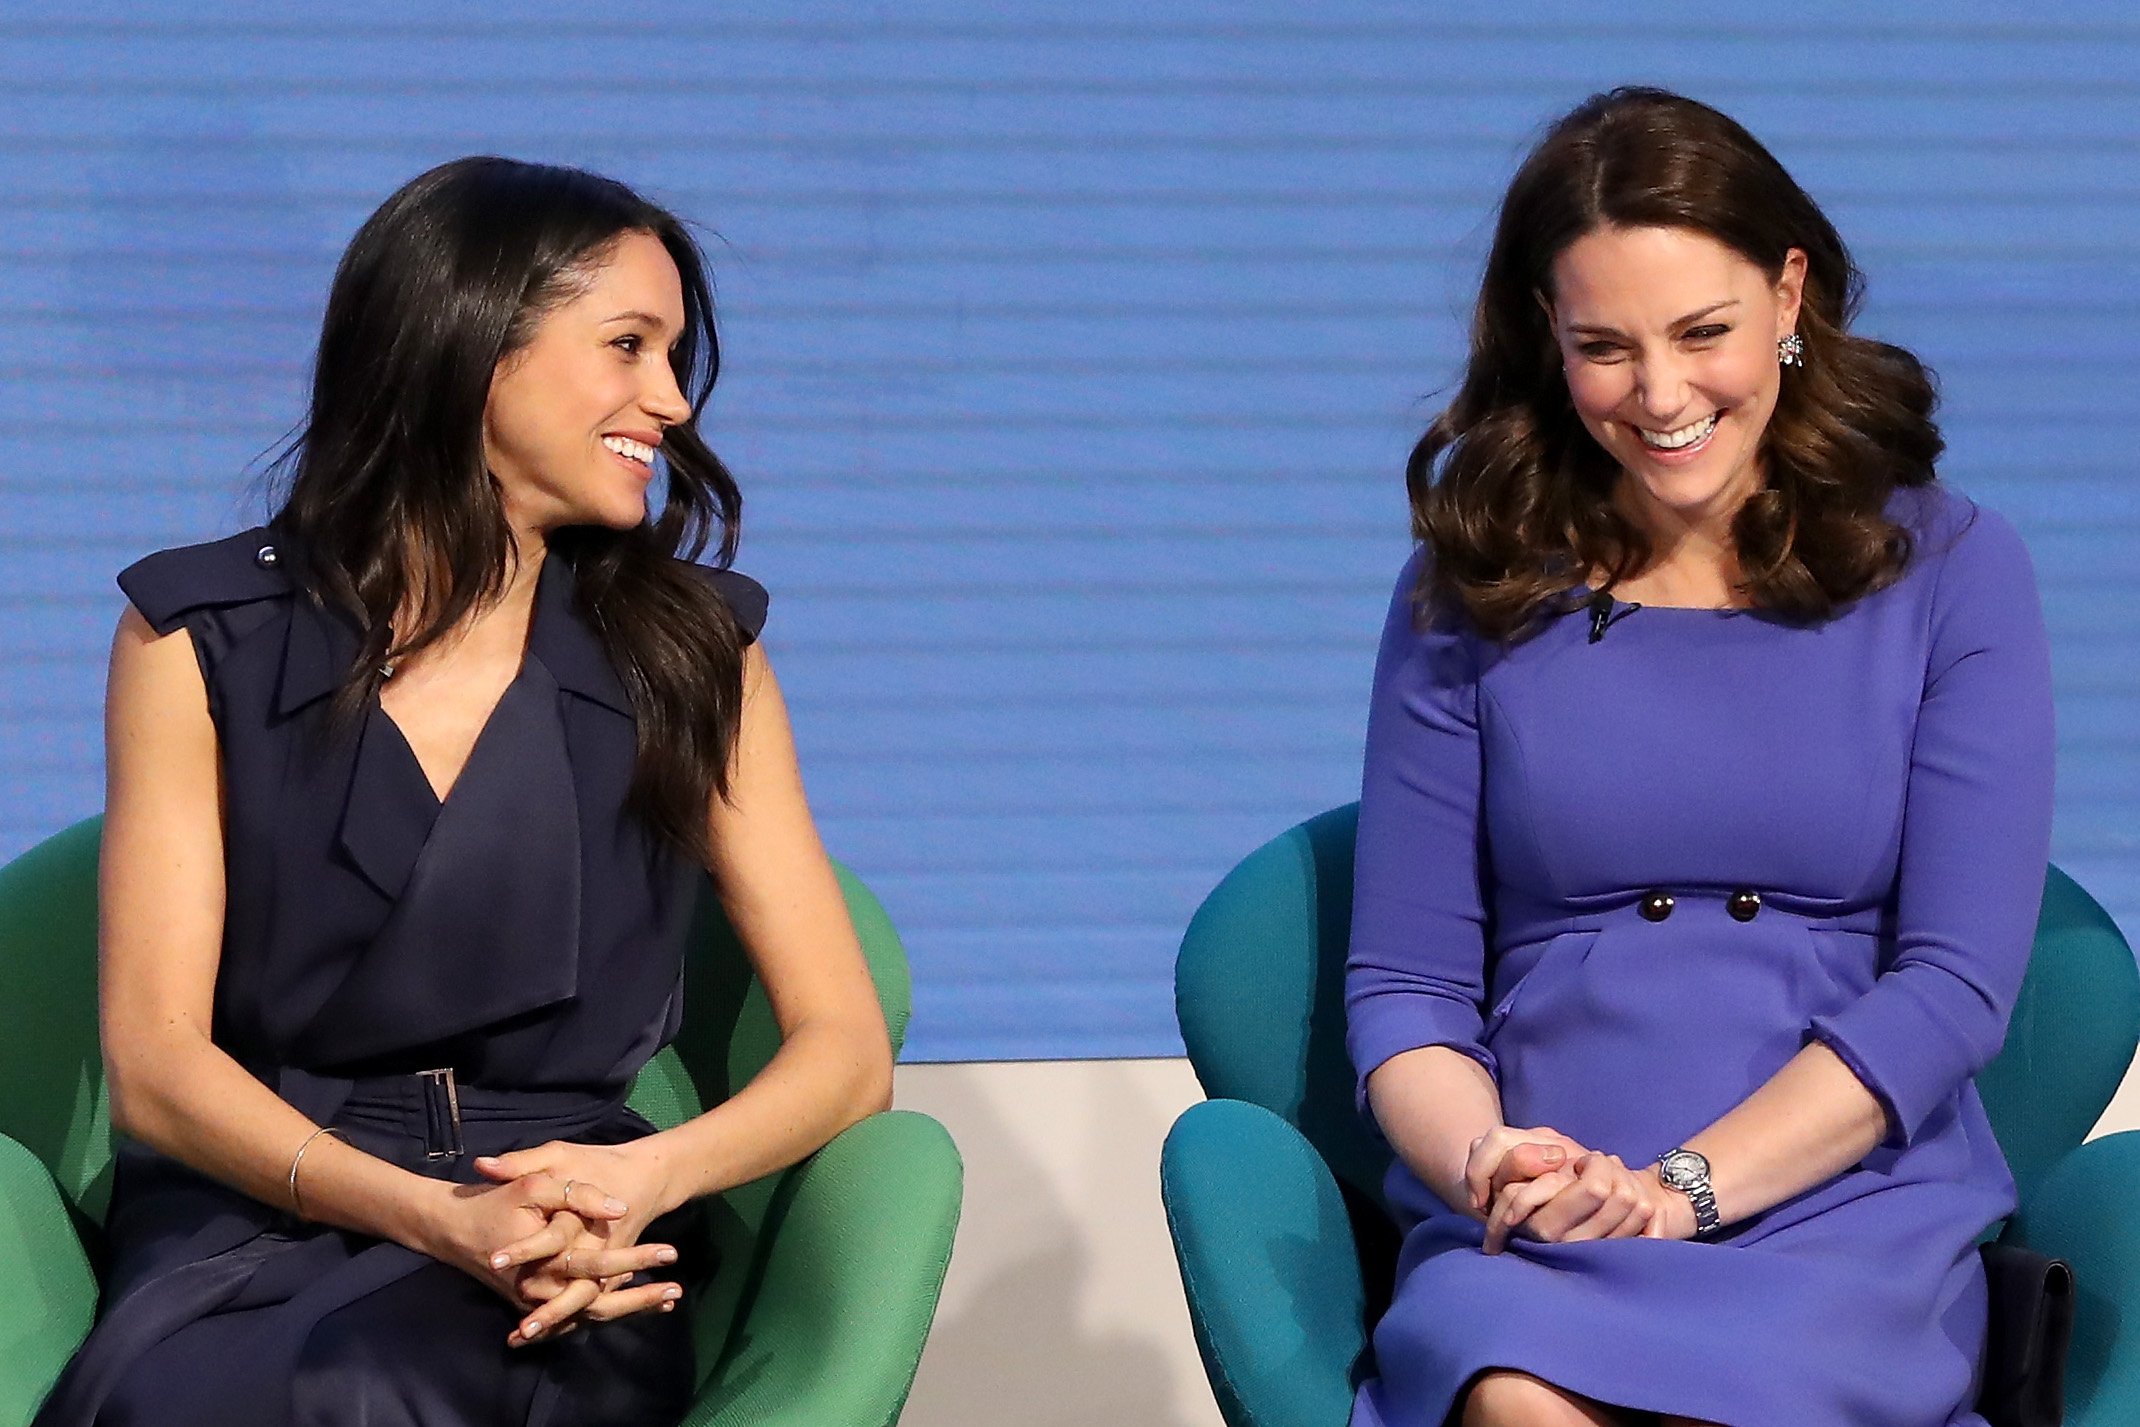 Meghan Markle and Kate Middleton, who Prince Harry says along with Prince William were starstuck by 'Suits' actor, onstage at the Royal Foundation Forum in 2018